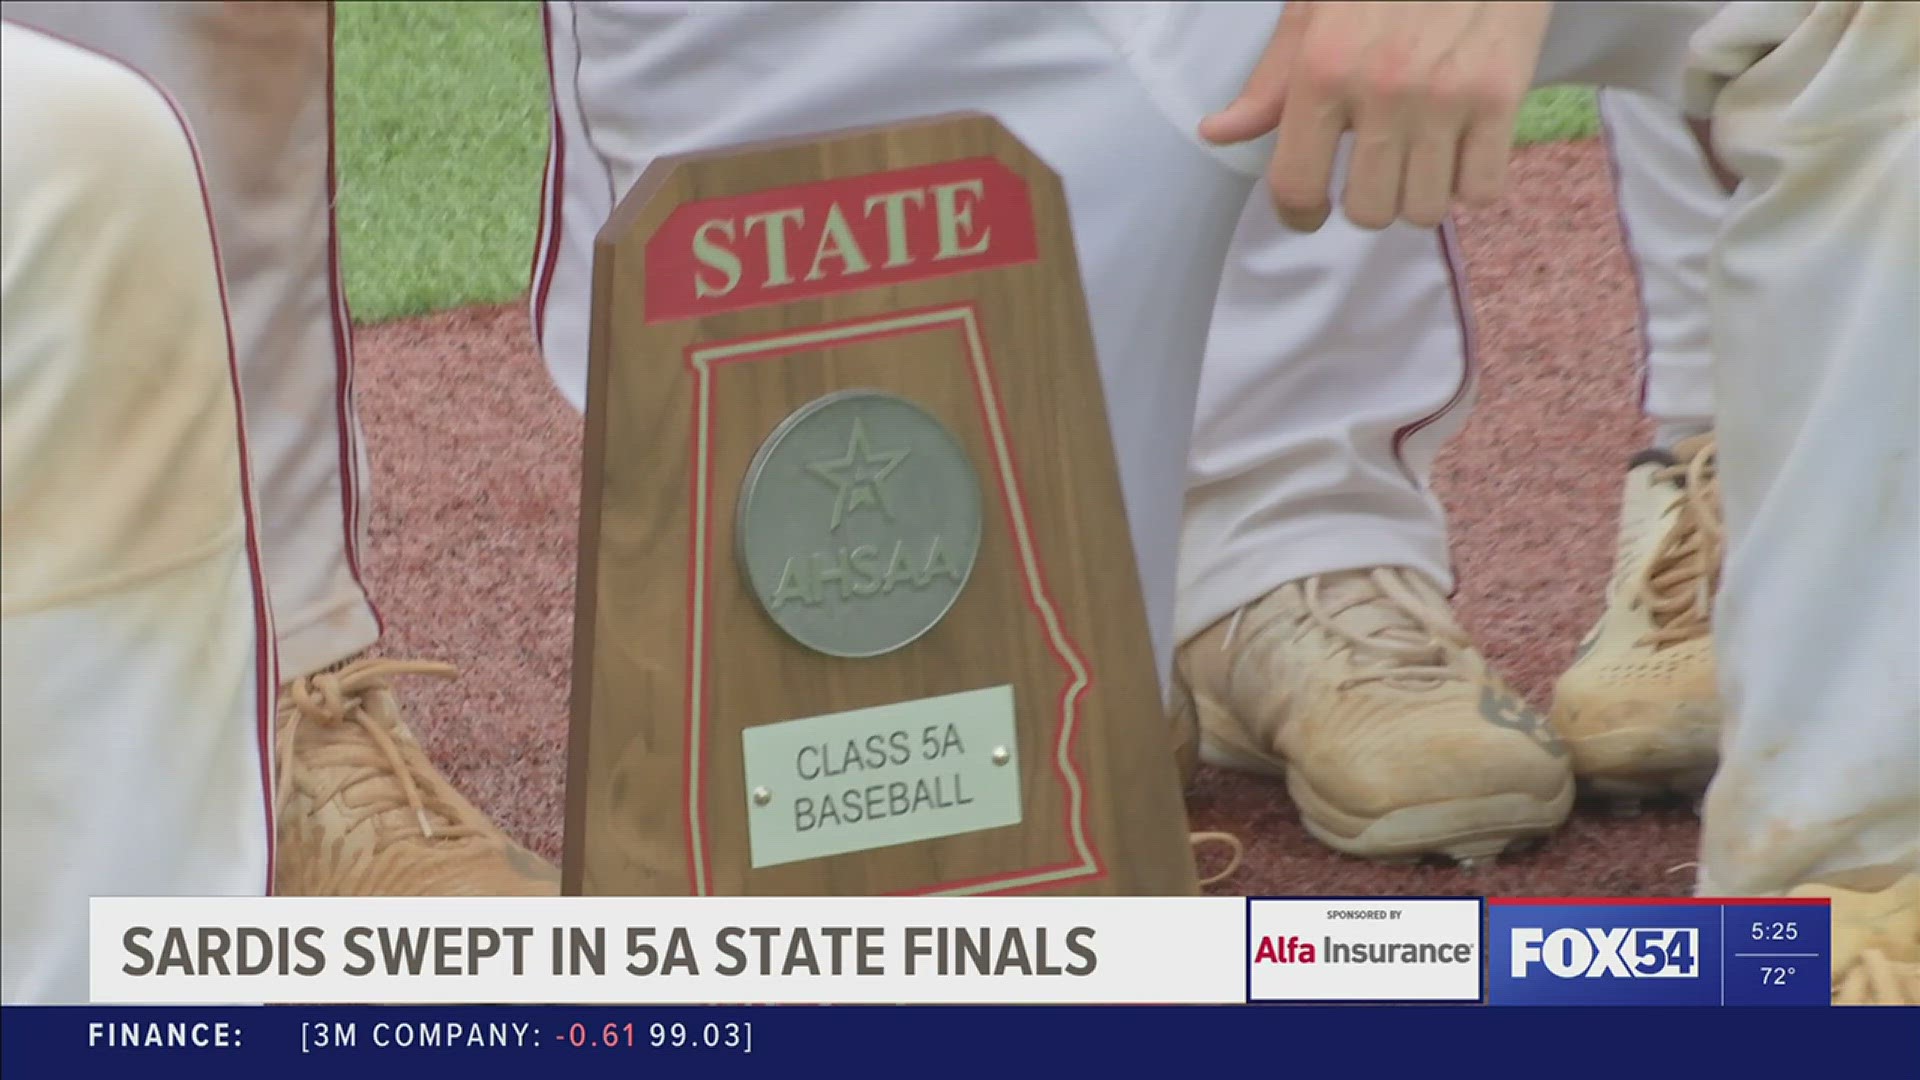 Allowing a later 2-run homer downs Sardis in the 5A baseball title game.